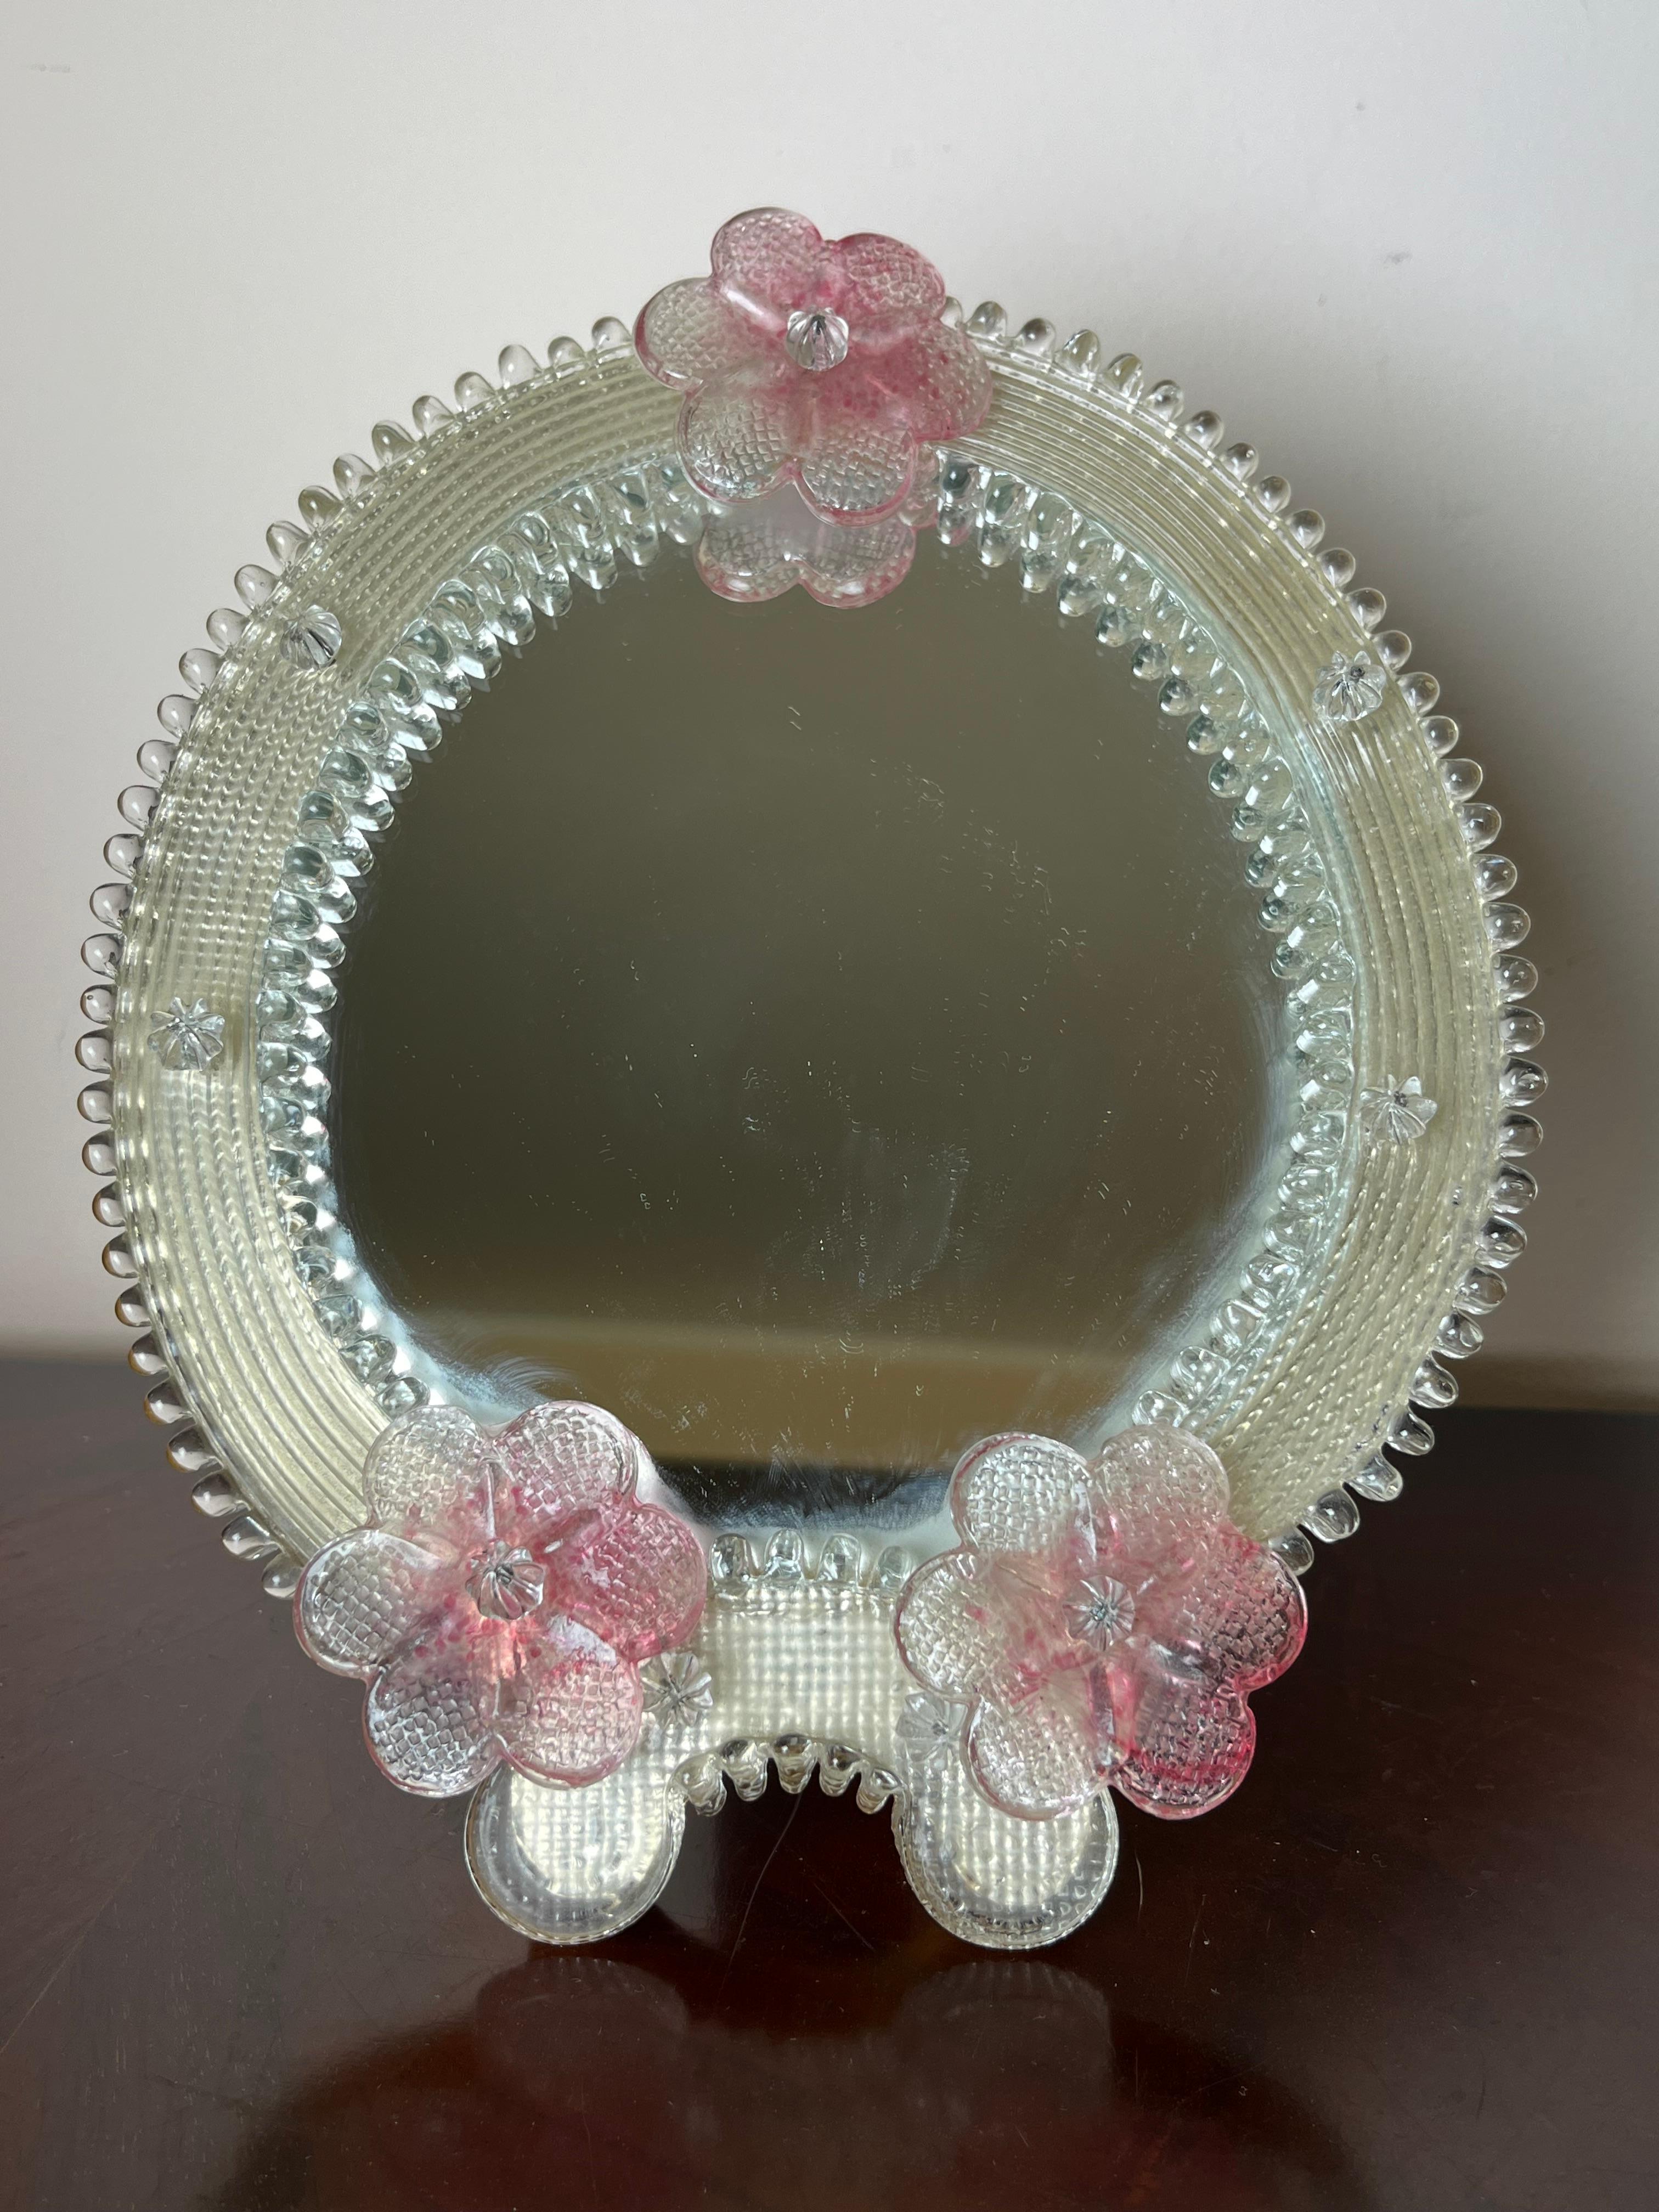 Mid-Century 1970s Venetian Murano glass table mirror
It can be hung. It is intact and in excellent condition.